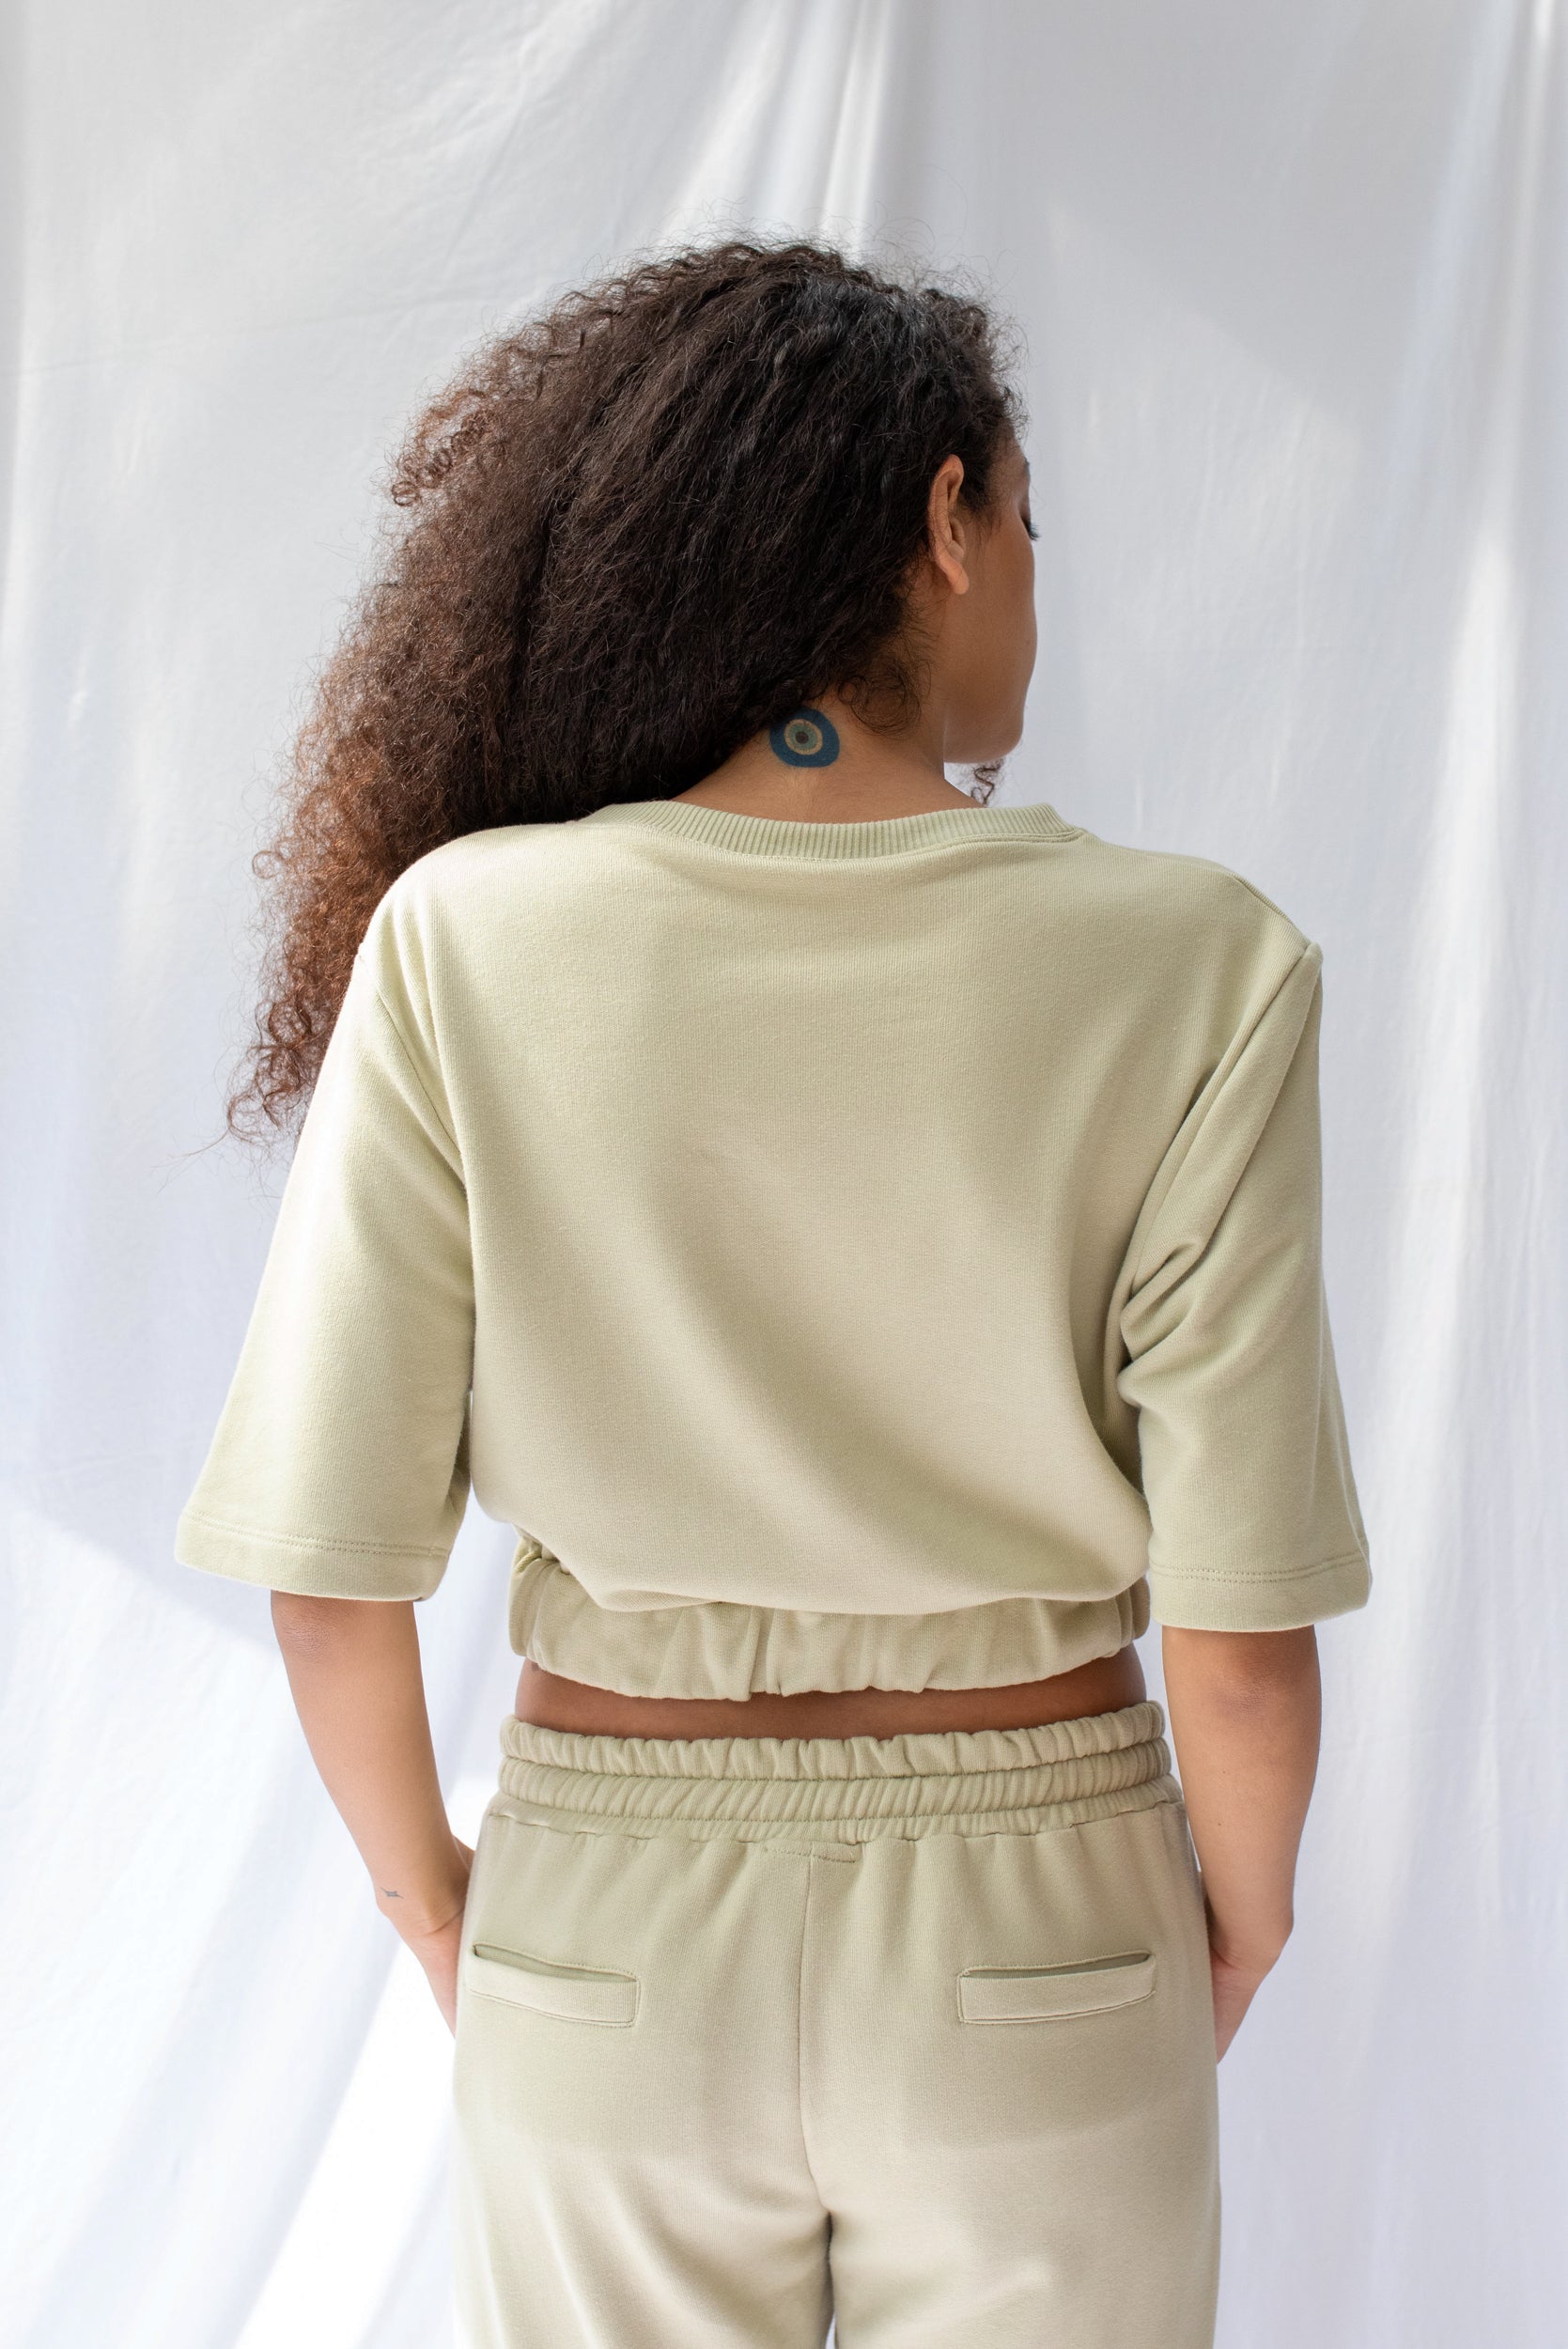 Marlo Top | Green Tea (S,M,L only)